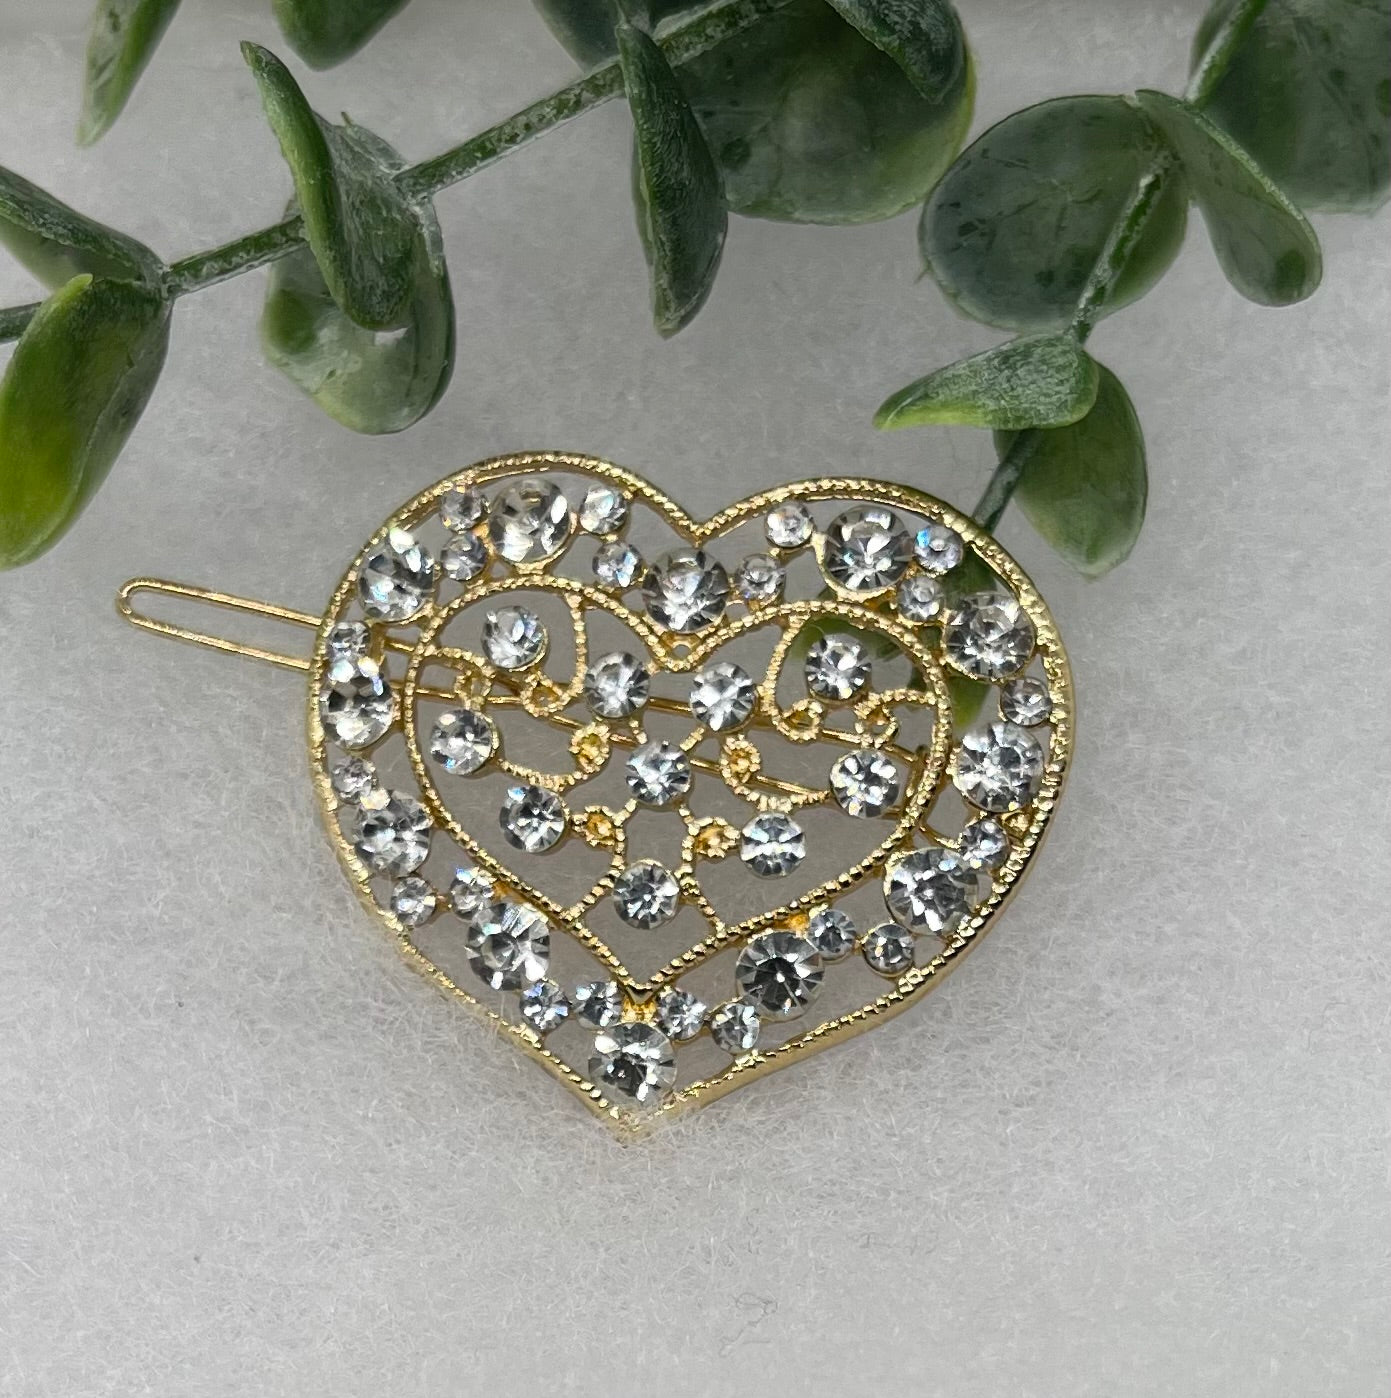 Clear Crystal rhinestone heart gold tone hair clip approximately 2.0” long hair accessory bridal wedding Retro Bridal Party Prom Birthday gifts